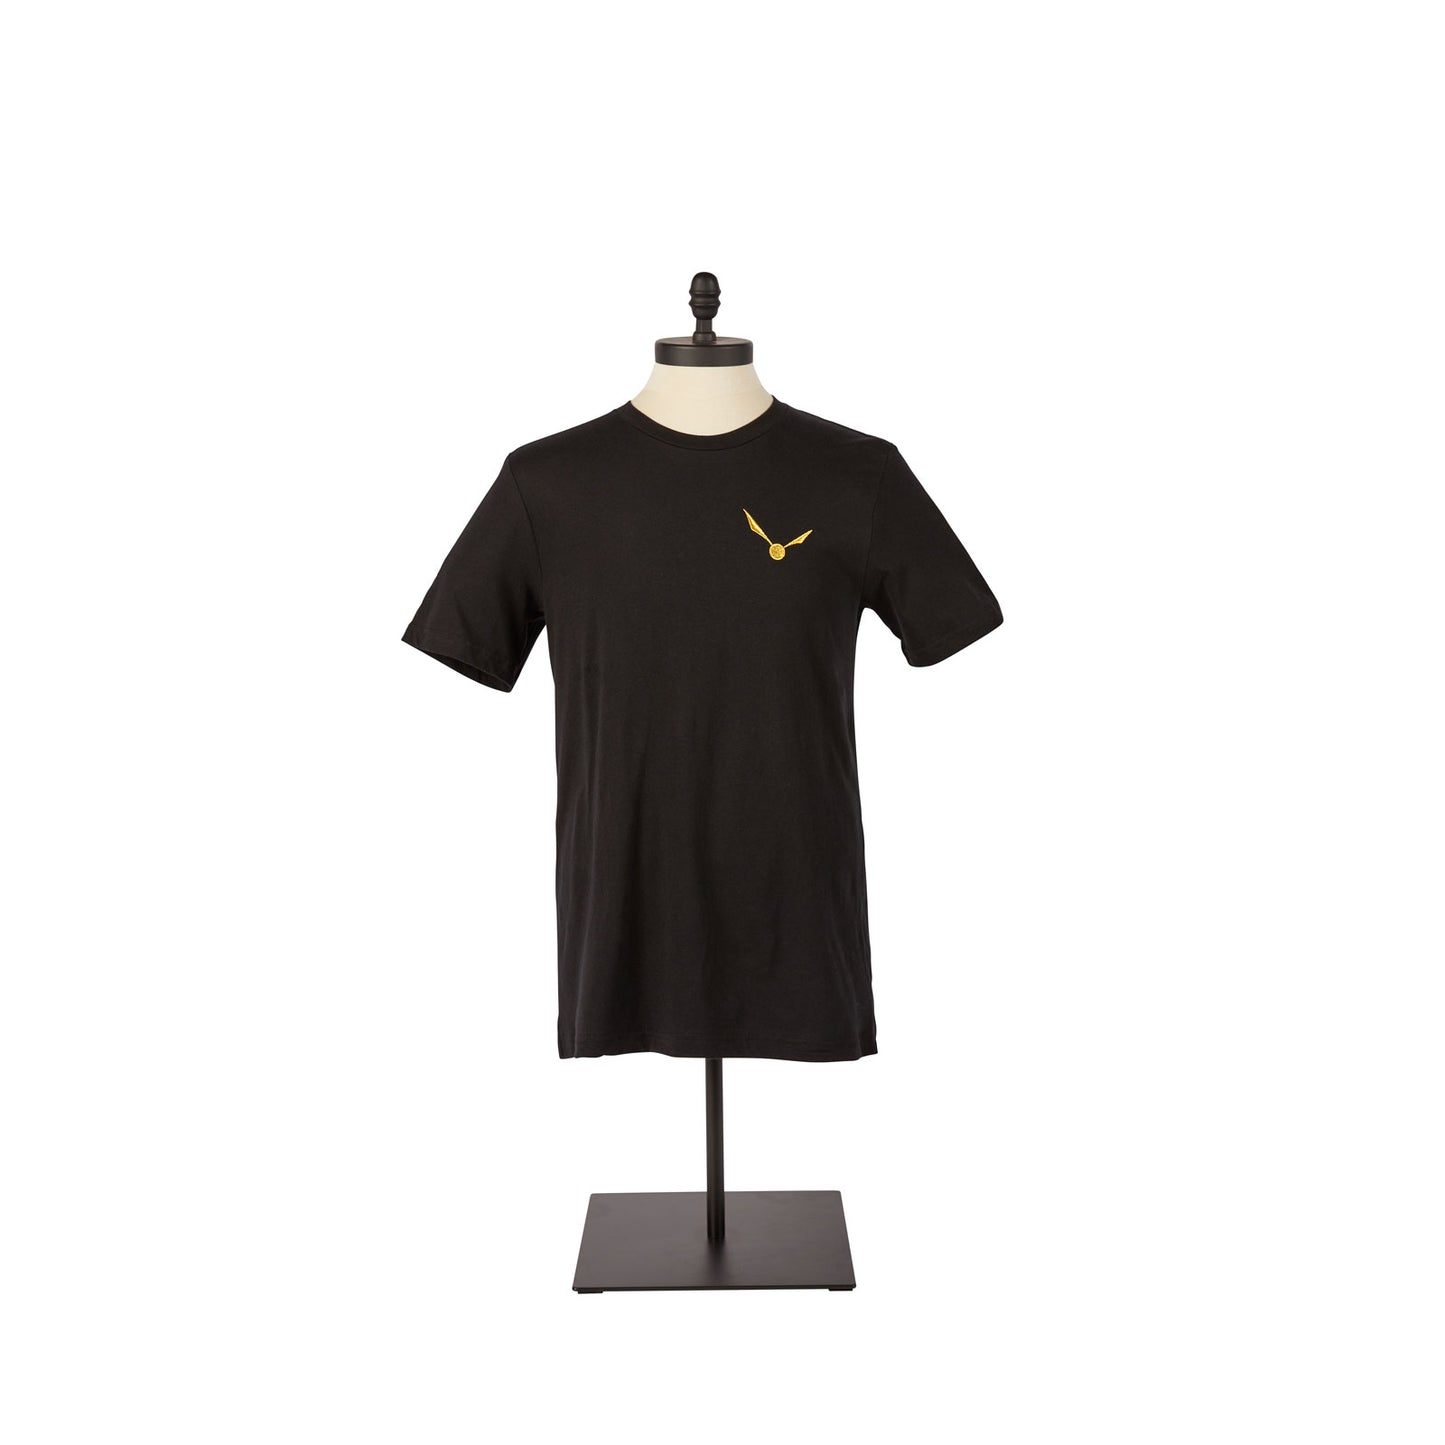 THE GOLDEN SNITCH™ LOGO T-SHIRT – Harry Potter The Exhibition